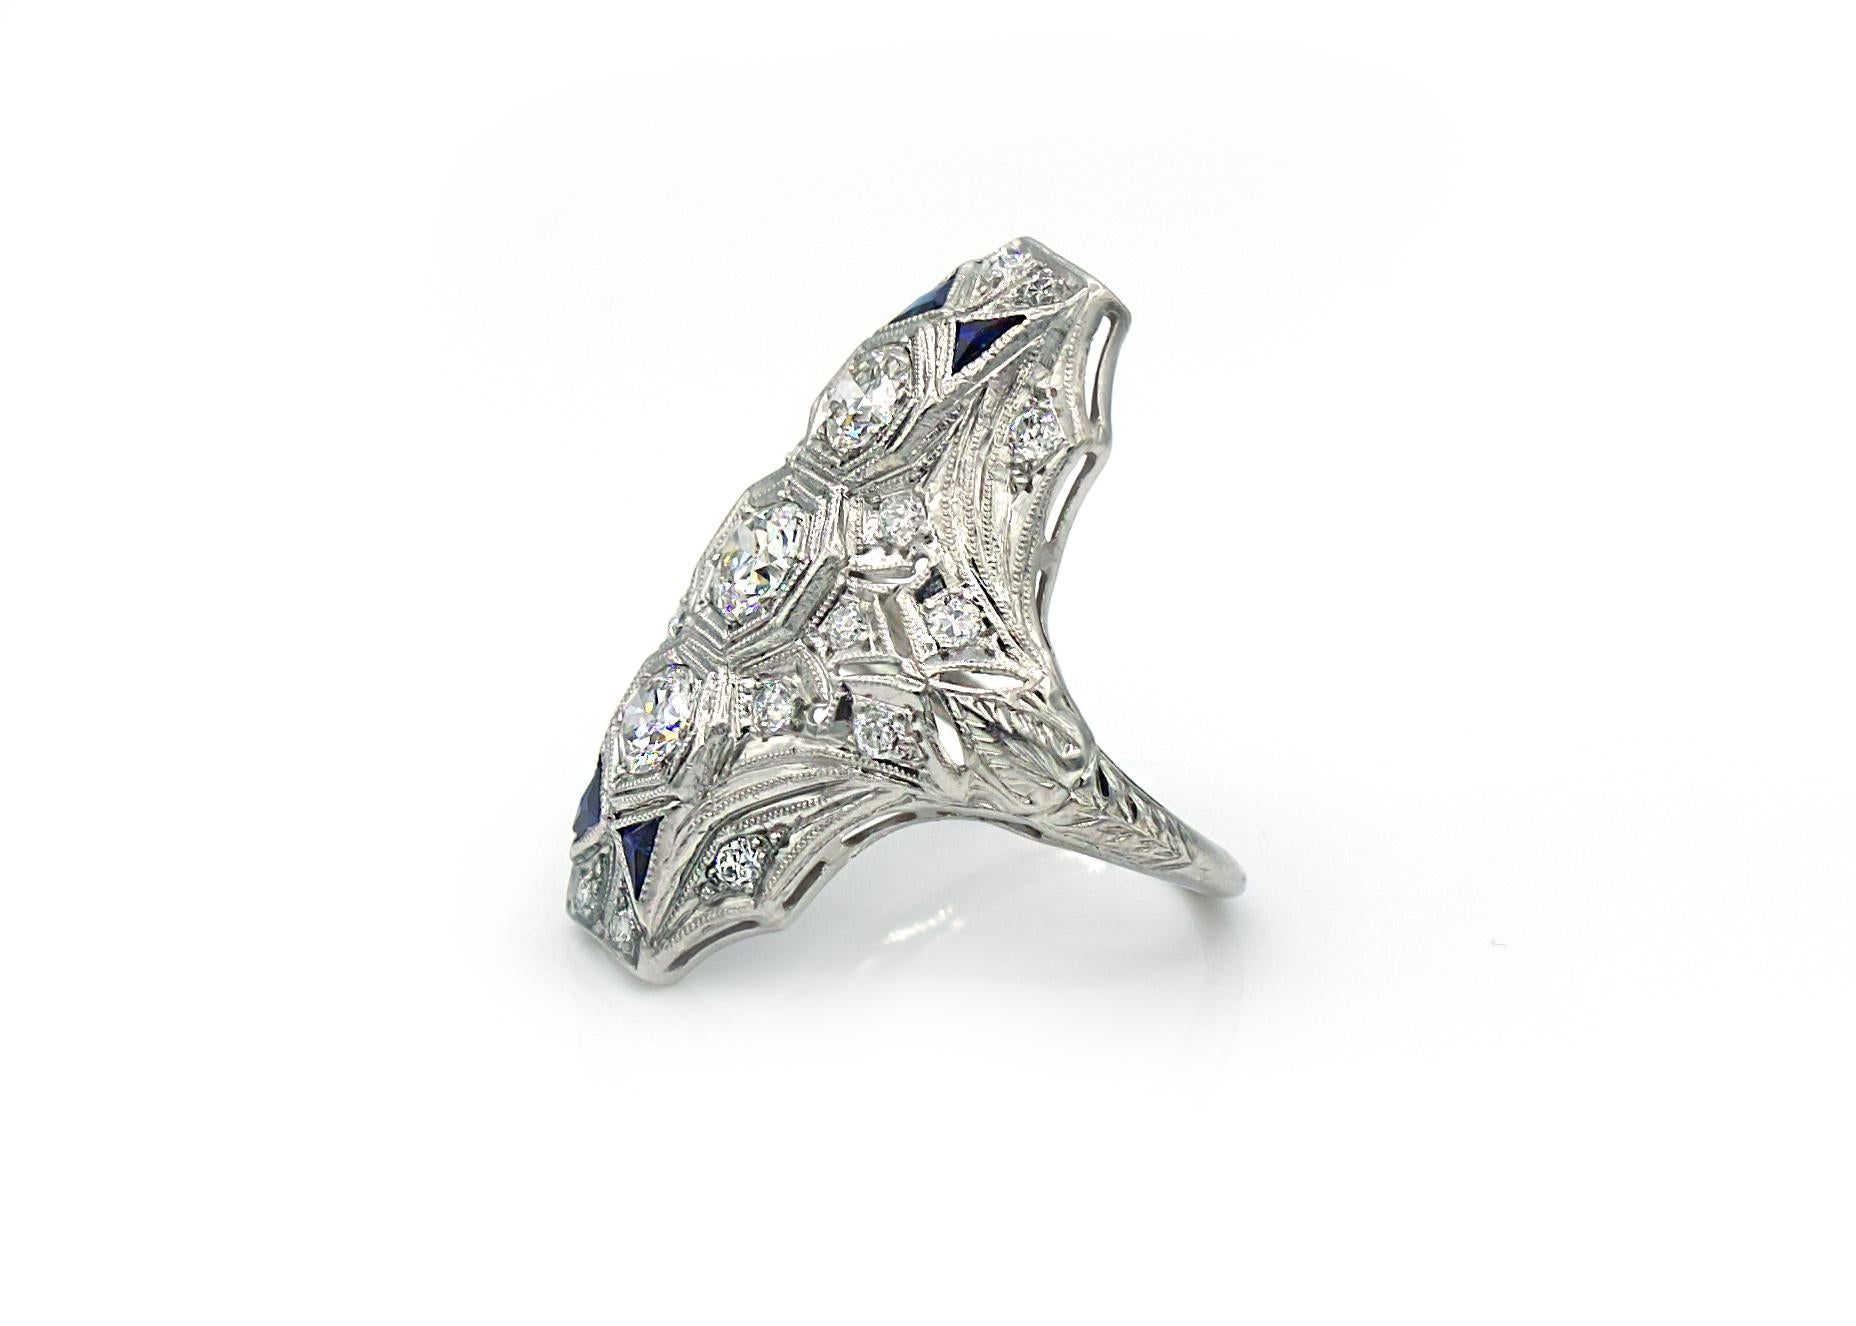 This early 20th Century antique platinum ring features 3 large old European cut diamonds at its center and 18 smaller diamonds accenting the openwork and filigree of the north-south central line. In addition, two bow-ties made of 4 deep blue